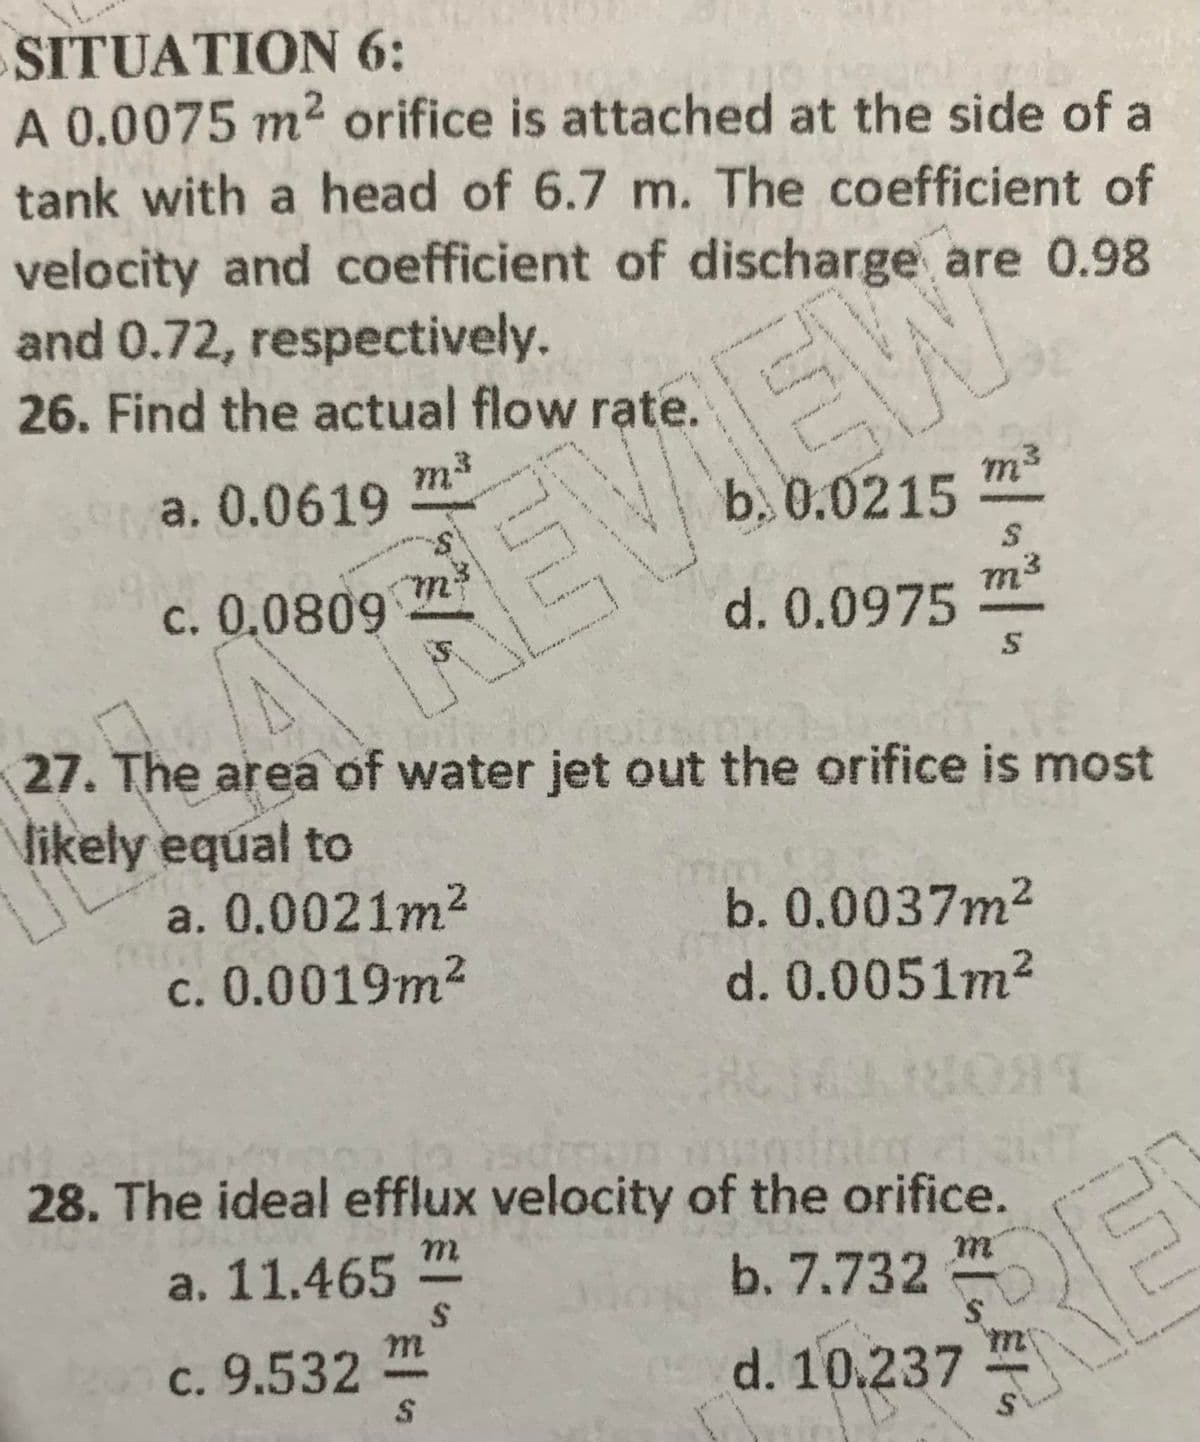 SITUATION 6:
A 0.0075 m2 orifice is attached at the side of a
tank with a head of 6.7 m. The coefficient of
velocity and coefficient of discharge are 0.98
and 0.72, respectively.
26. Find the actual flow rate.
a. 0.0619
m3
b. 0.0215
m3
REVIEW
c. 0,0809
d. 0.0975
m³
27. The area of water jet out the orifice is most
Vikely equal to
a. 0.0021m2
b. 0.0037m2
d. 0.0051m2
c. 0.0019m²
2.
28. The ideal efflux velocity of the orifice.
m.
a. 11.465
b. 7.732
RE
c. 9.532
d. 10.237
